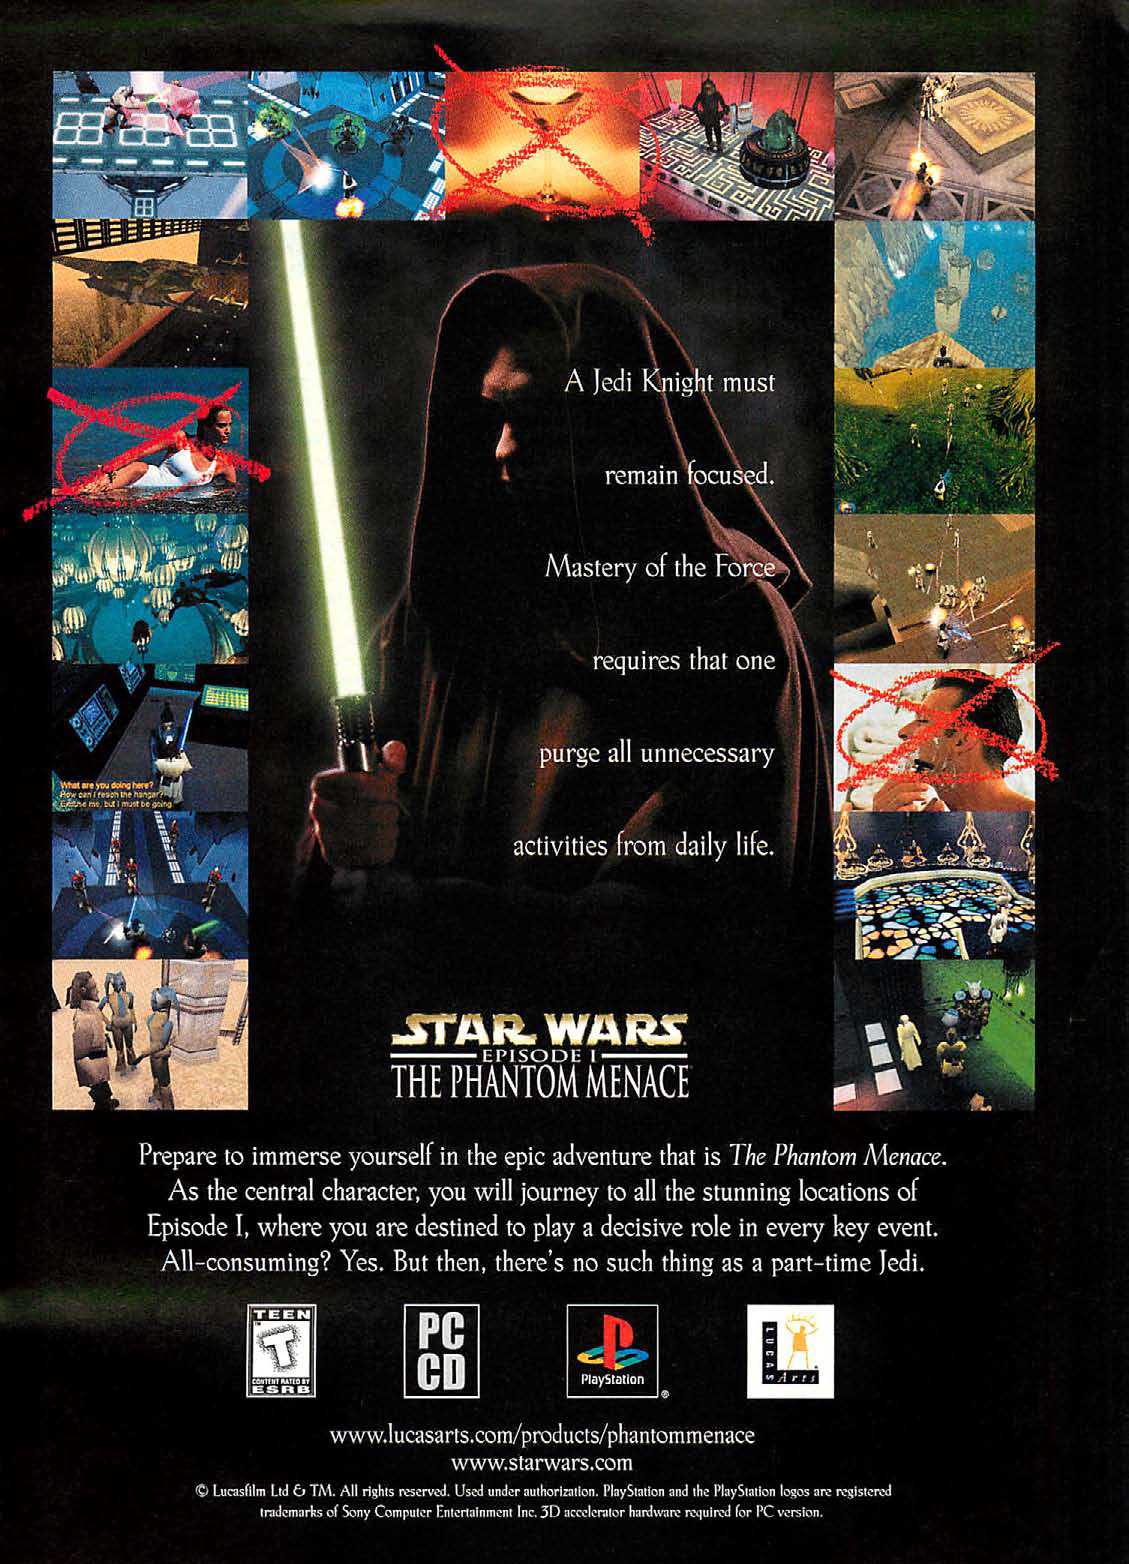 Star Wars: Episode I – The Phantom Menace
“A Jedi Knight must remain focused. Mastery of the Force requires that one purge all unnecessary activities from daily life.” (Computer Gaming World #182, Sept. 1999)